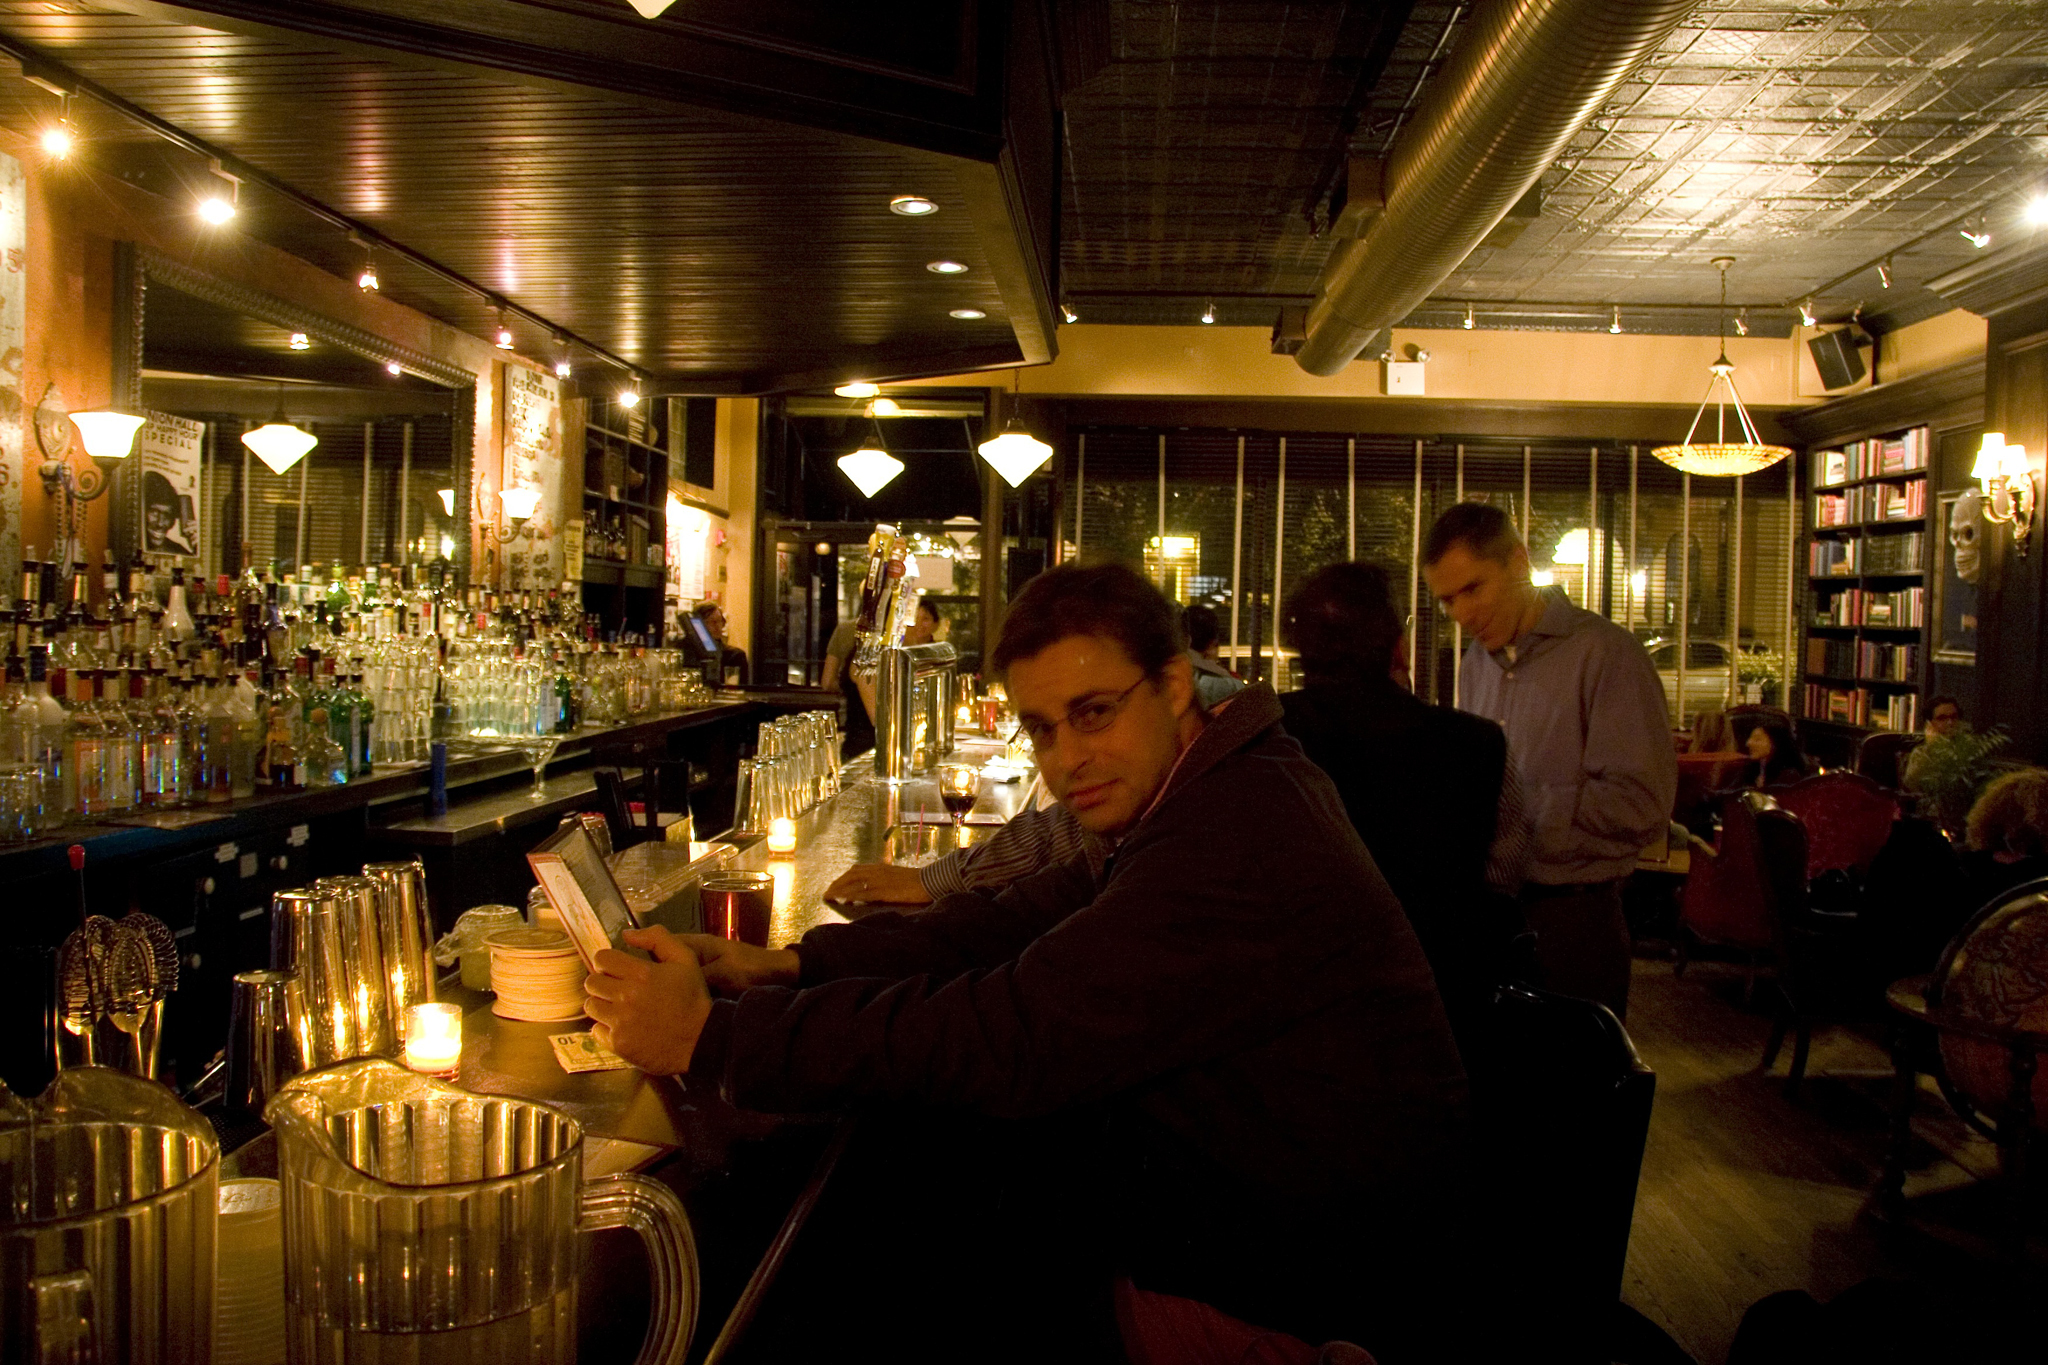 Cheap date ideas for a great night out in NYC